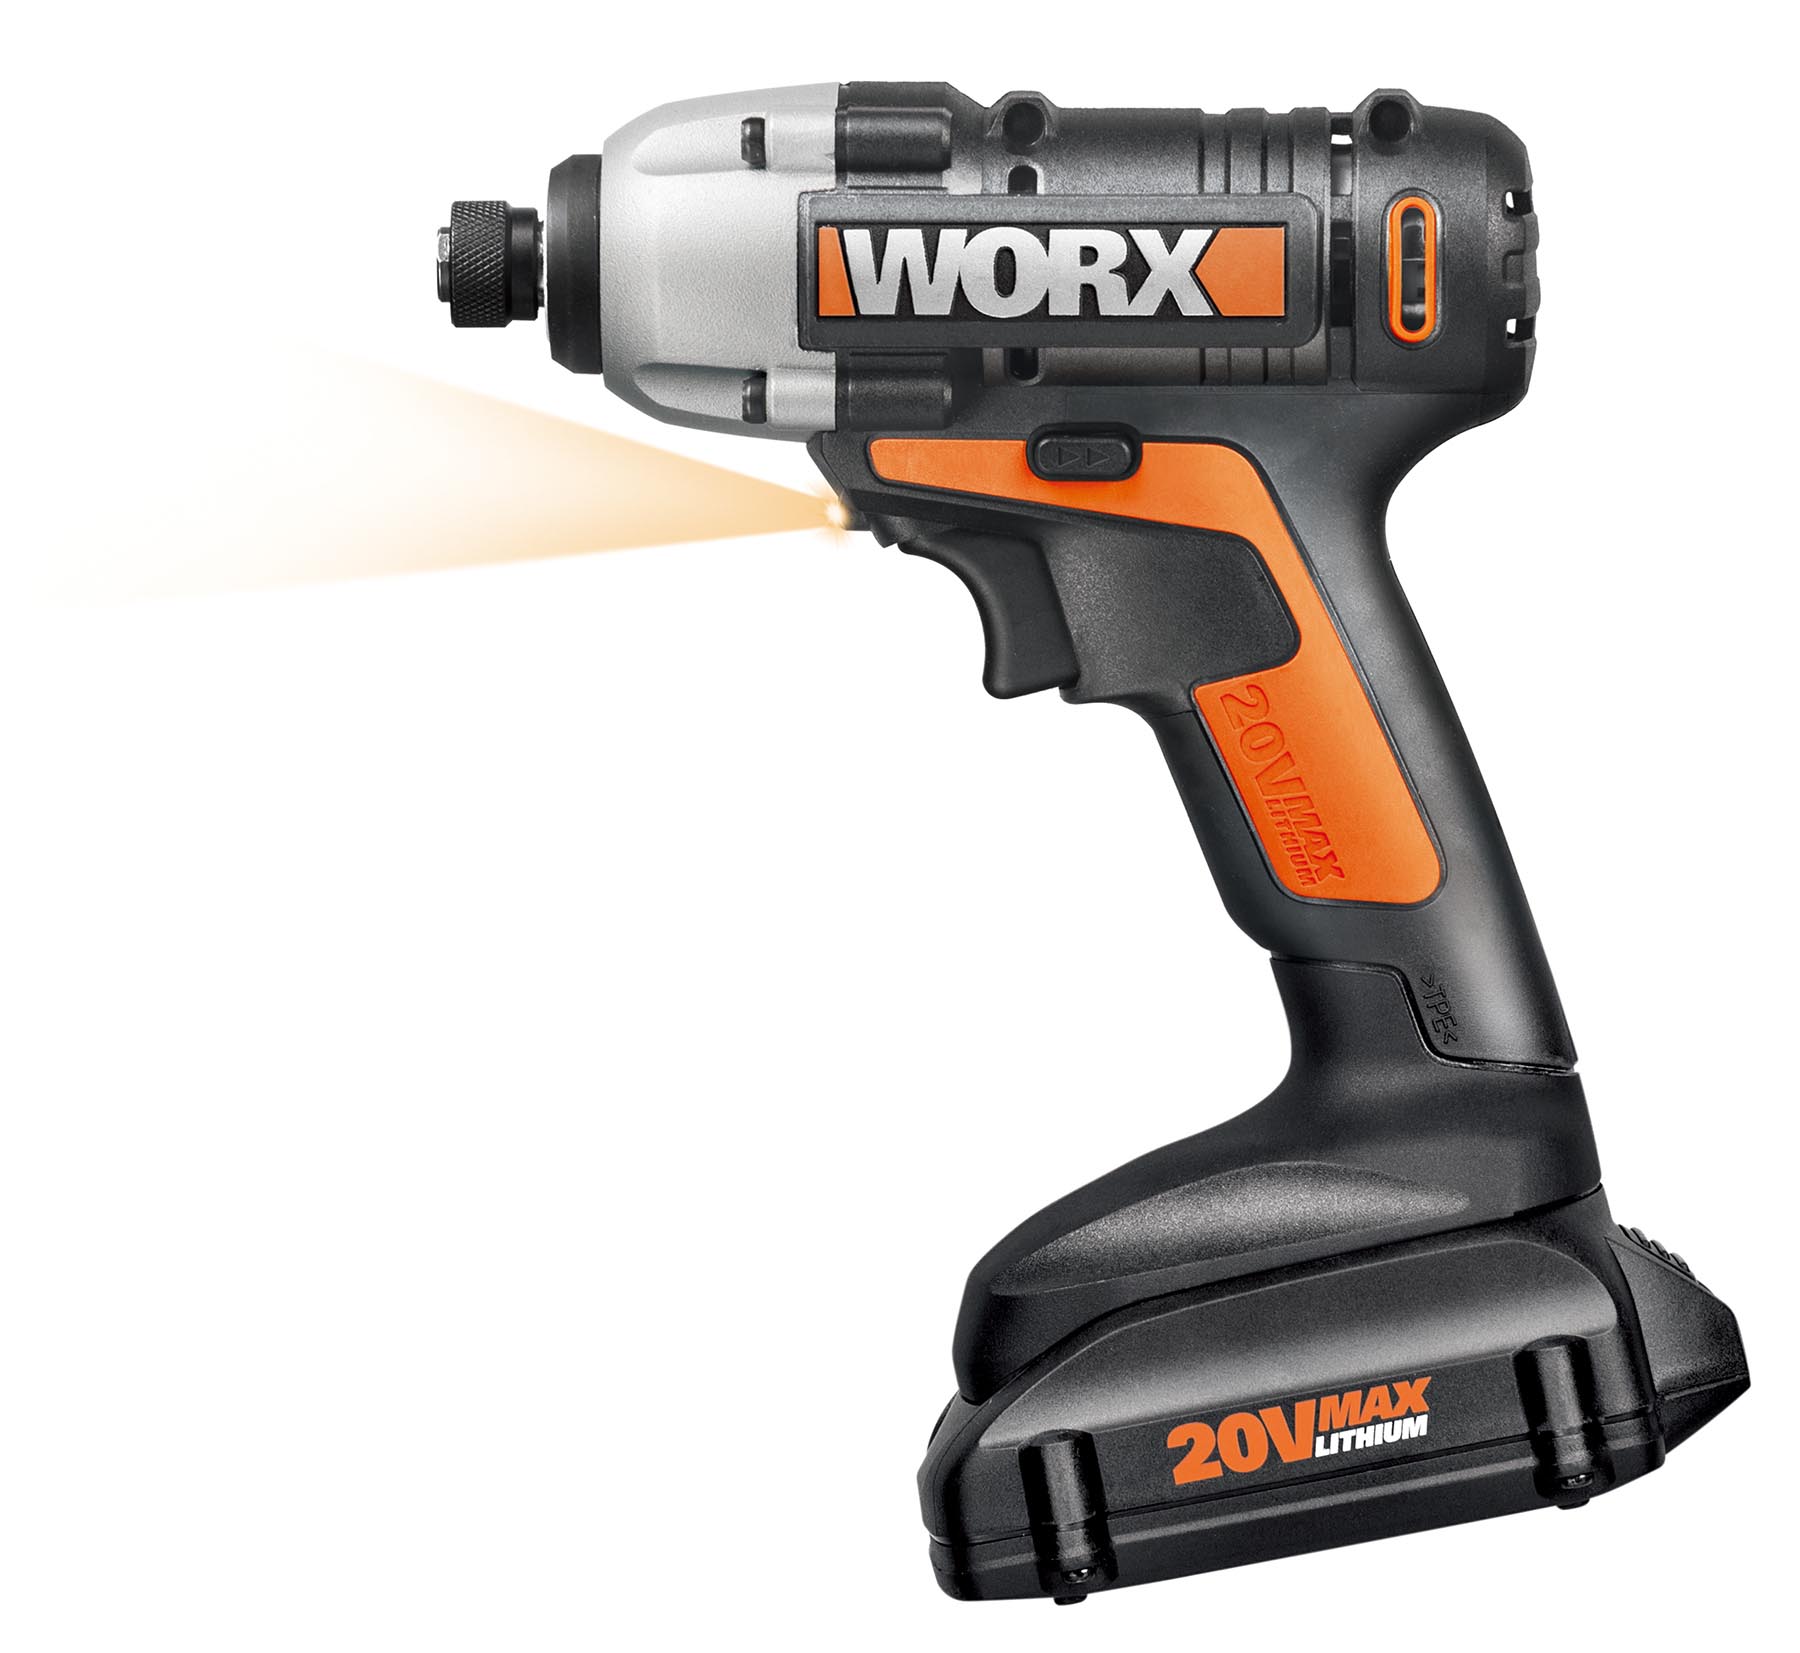 New WORX PowerShare System Enables Single 20 volt Battery 